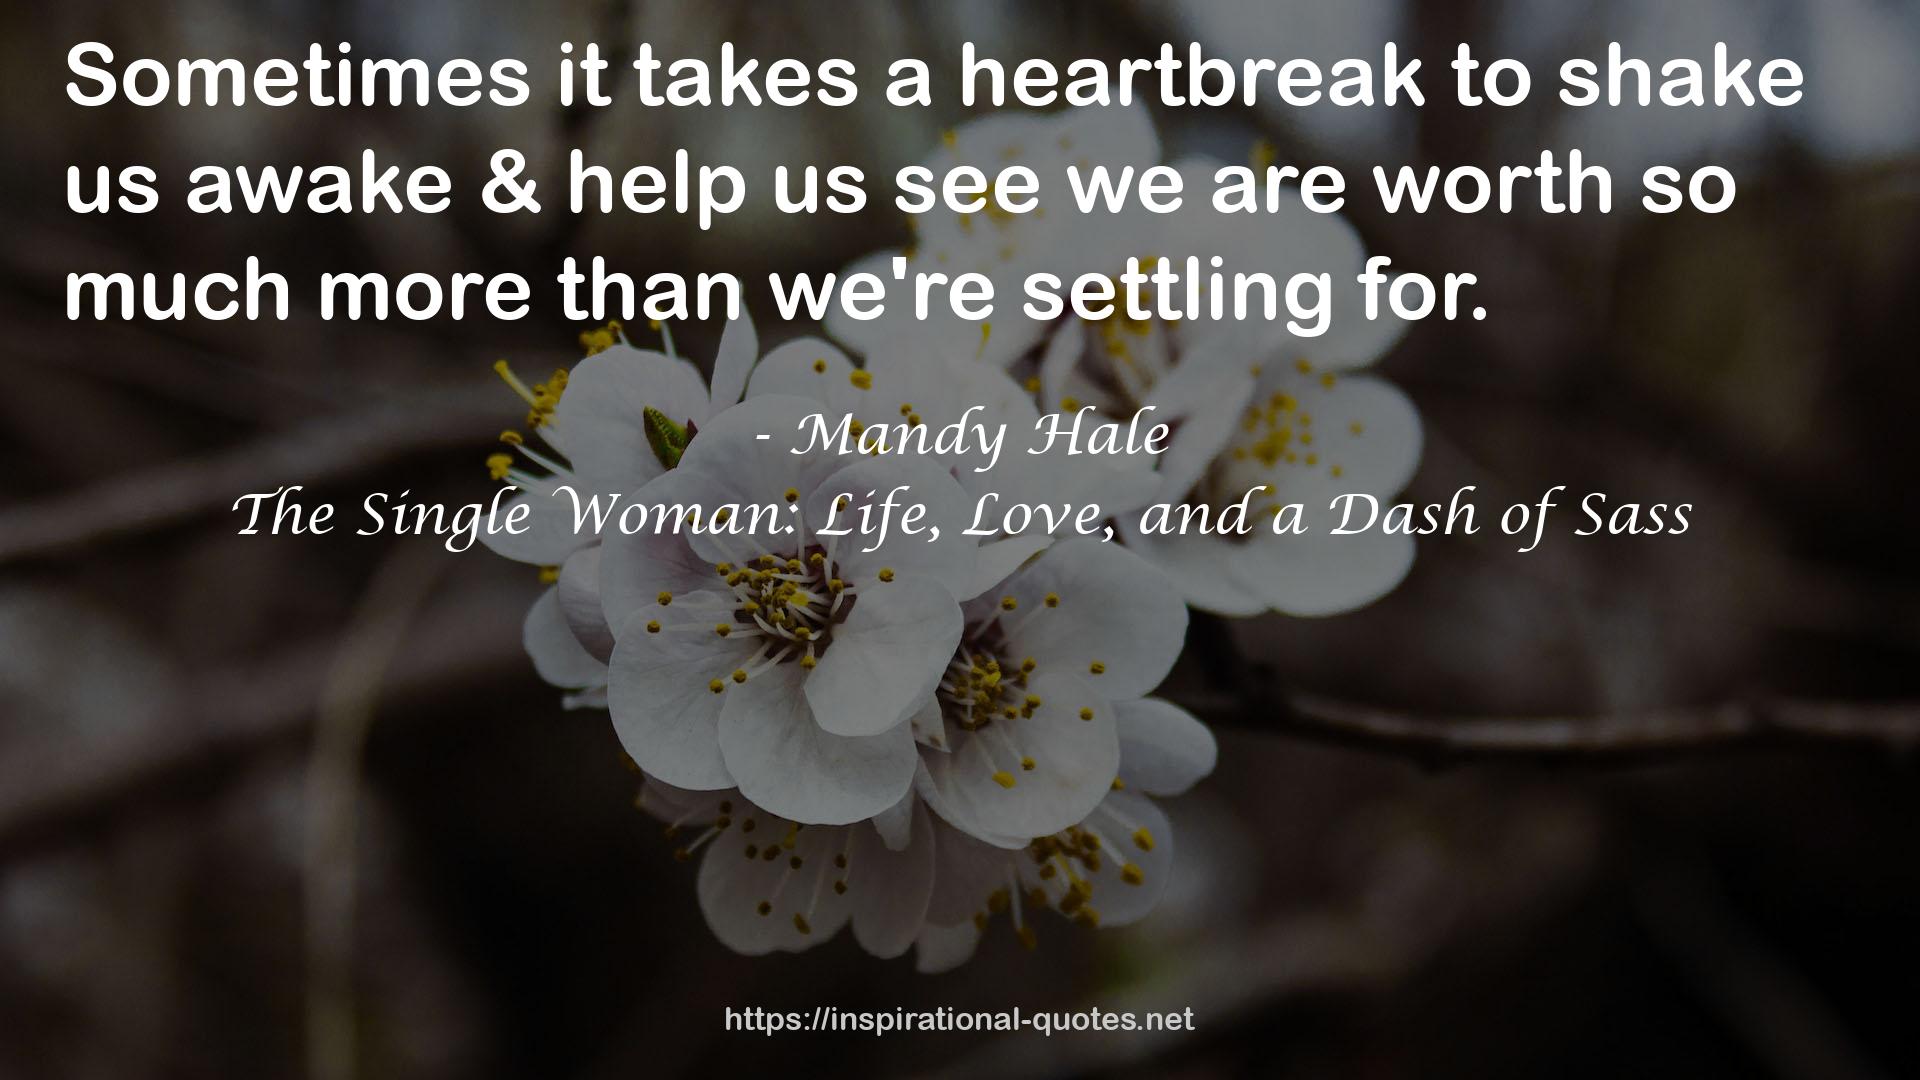 The Single Woman: Life, Love, and a Dash of Sass QUOTES